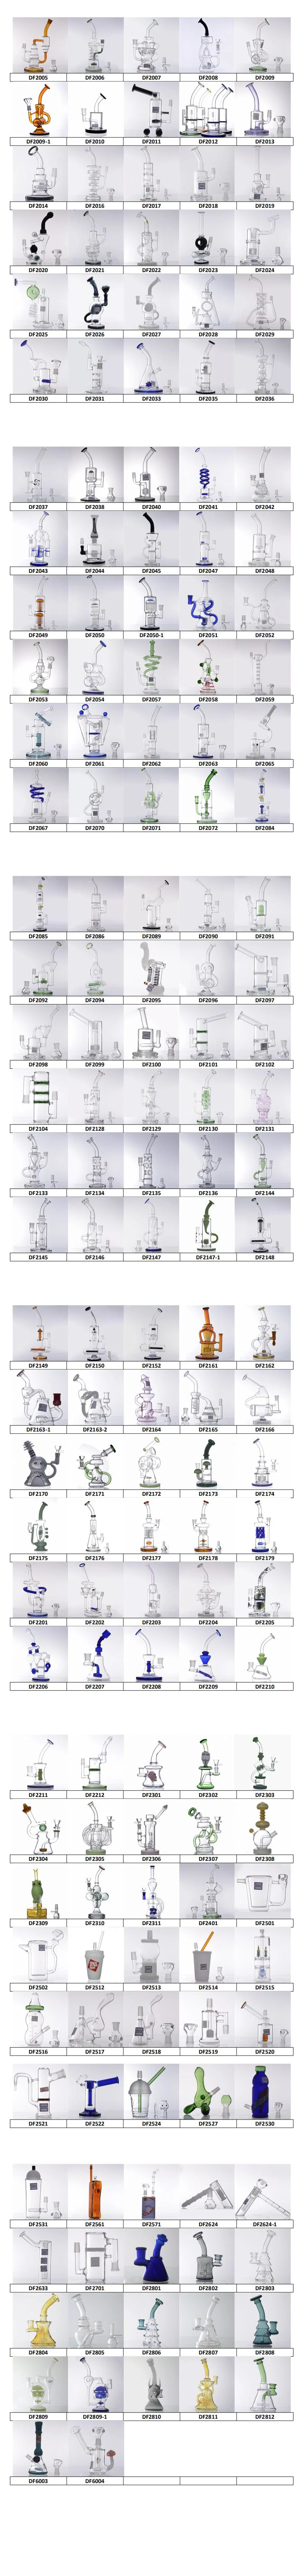 DF2028 Transparent Shisha Hookah Pipes for Smoking Glass Water Pipe